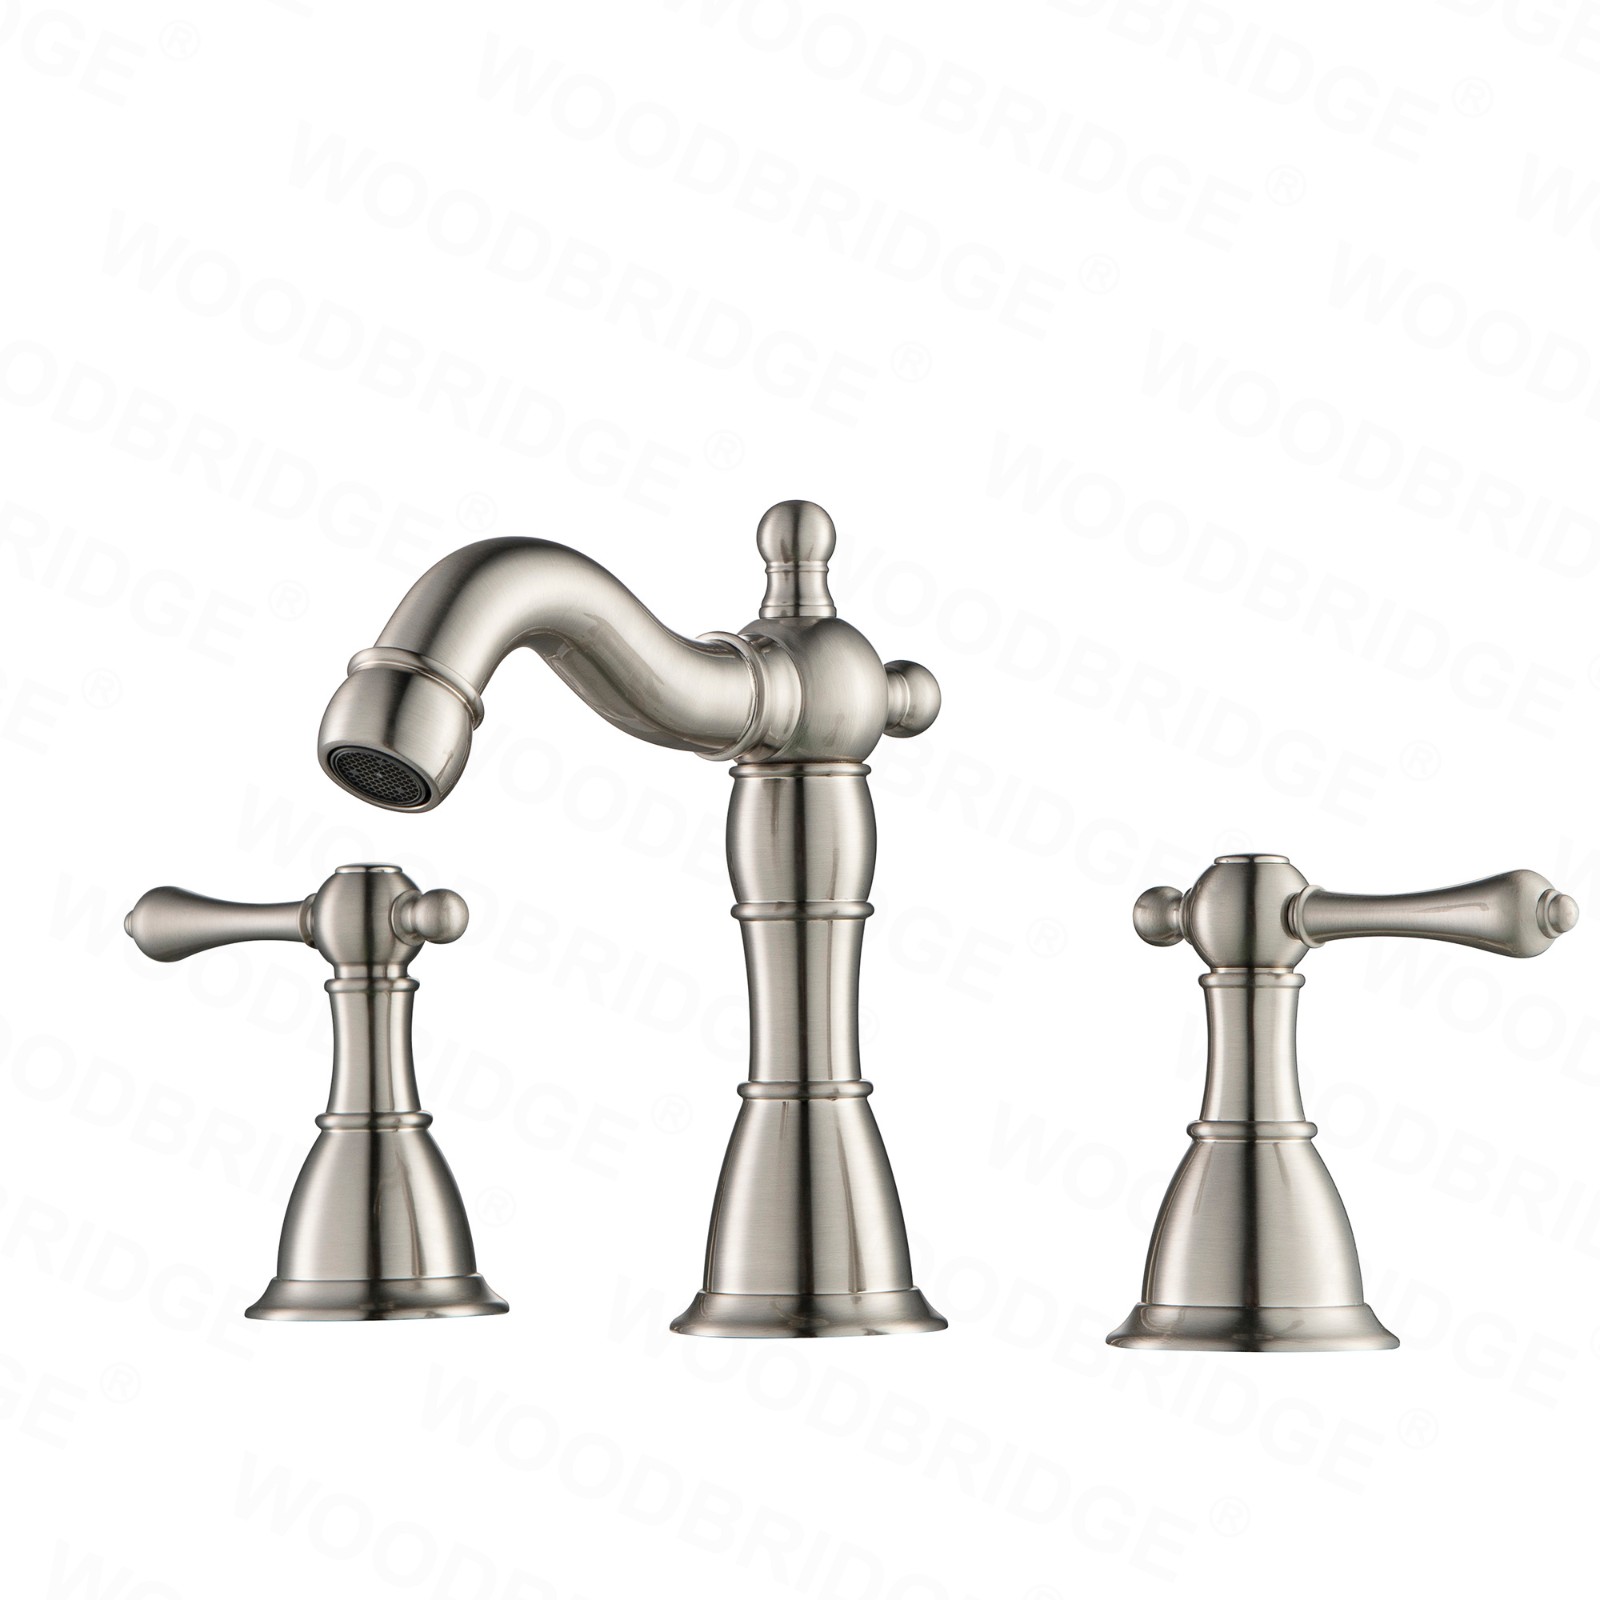  WOODBRIDGE WB802005BN 8-inch 3-hole Widespread Lavatory Faucet with Two Metal Lever Handle, Brushed Nickel_6339